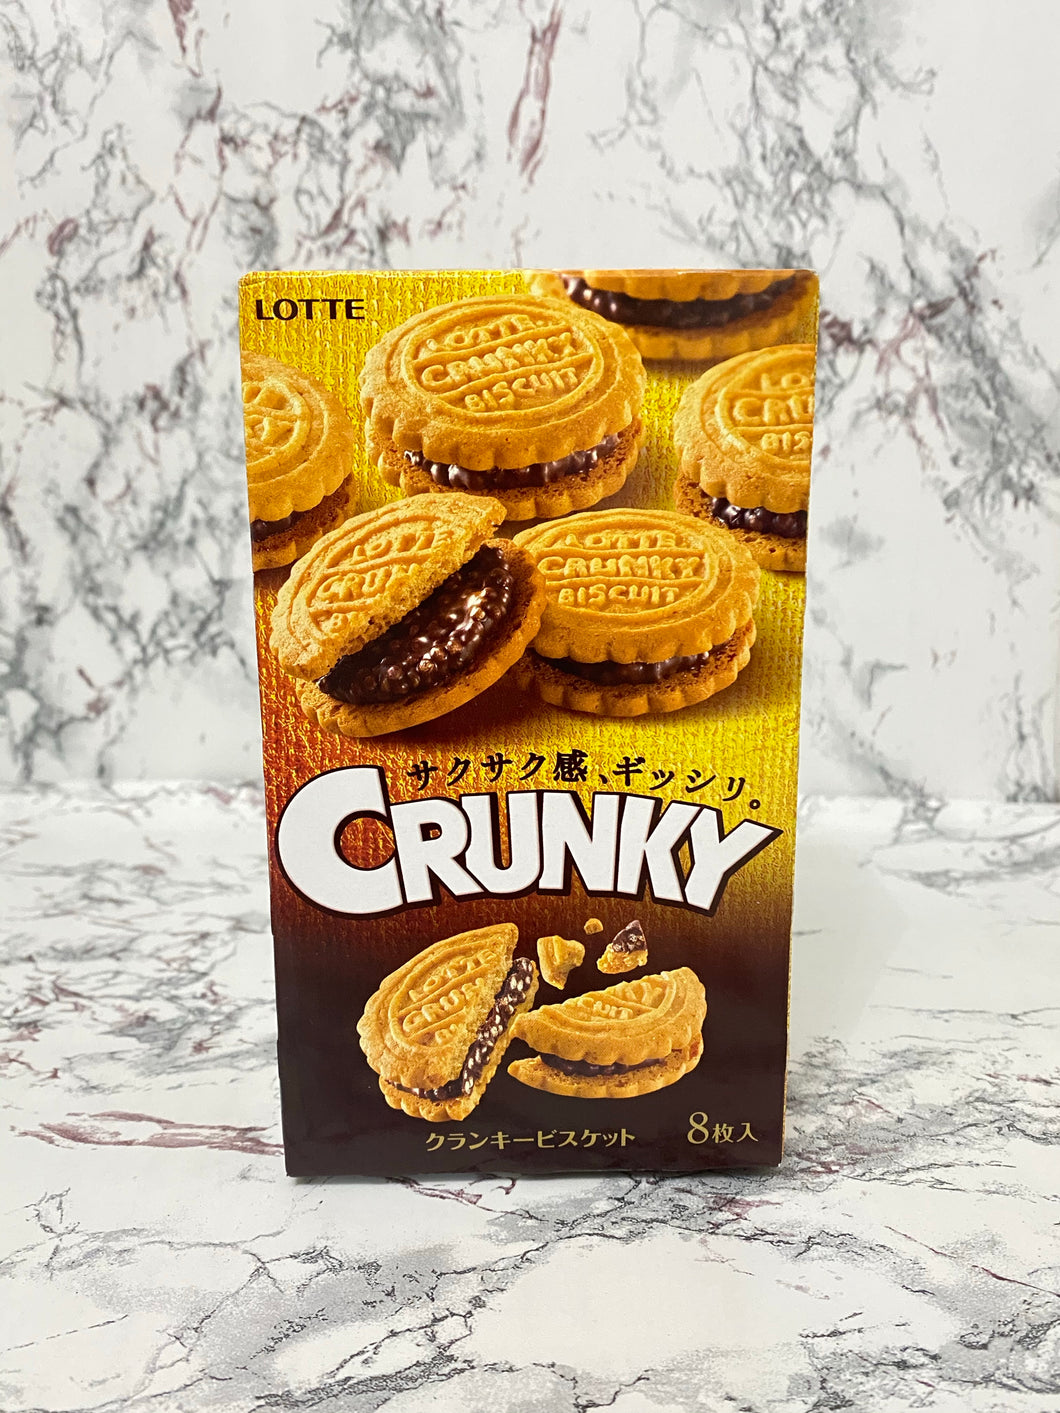 Lotte Crunky Chocolate Sandwich Biscuit